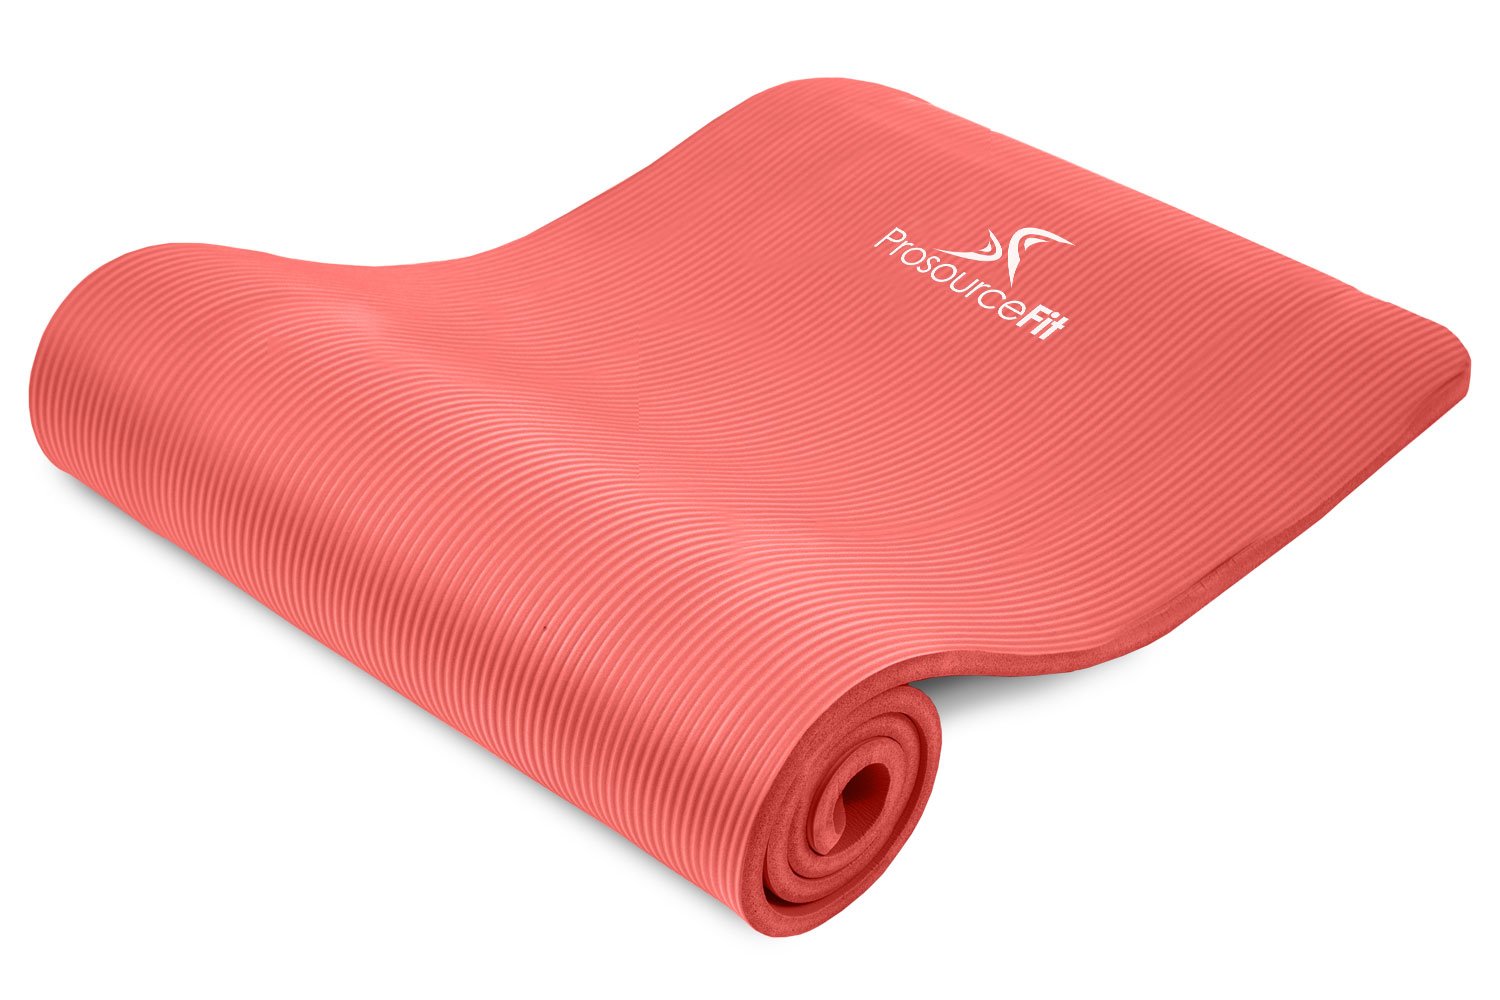 Extra Thick Yoga and Pilates Mat 1/2 inch 8 Colors The extra thick